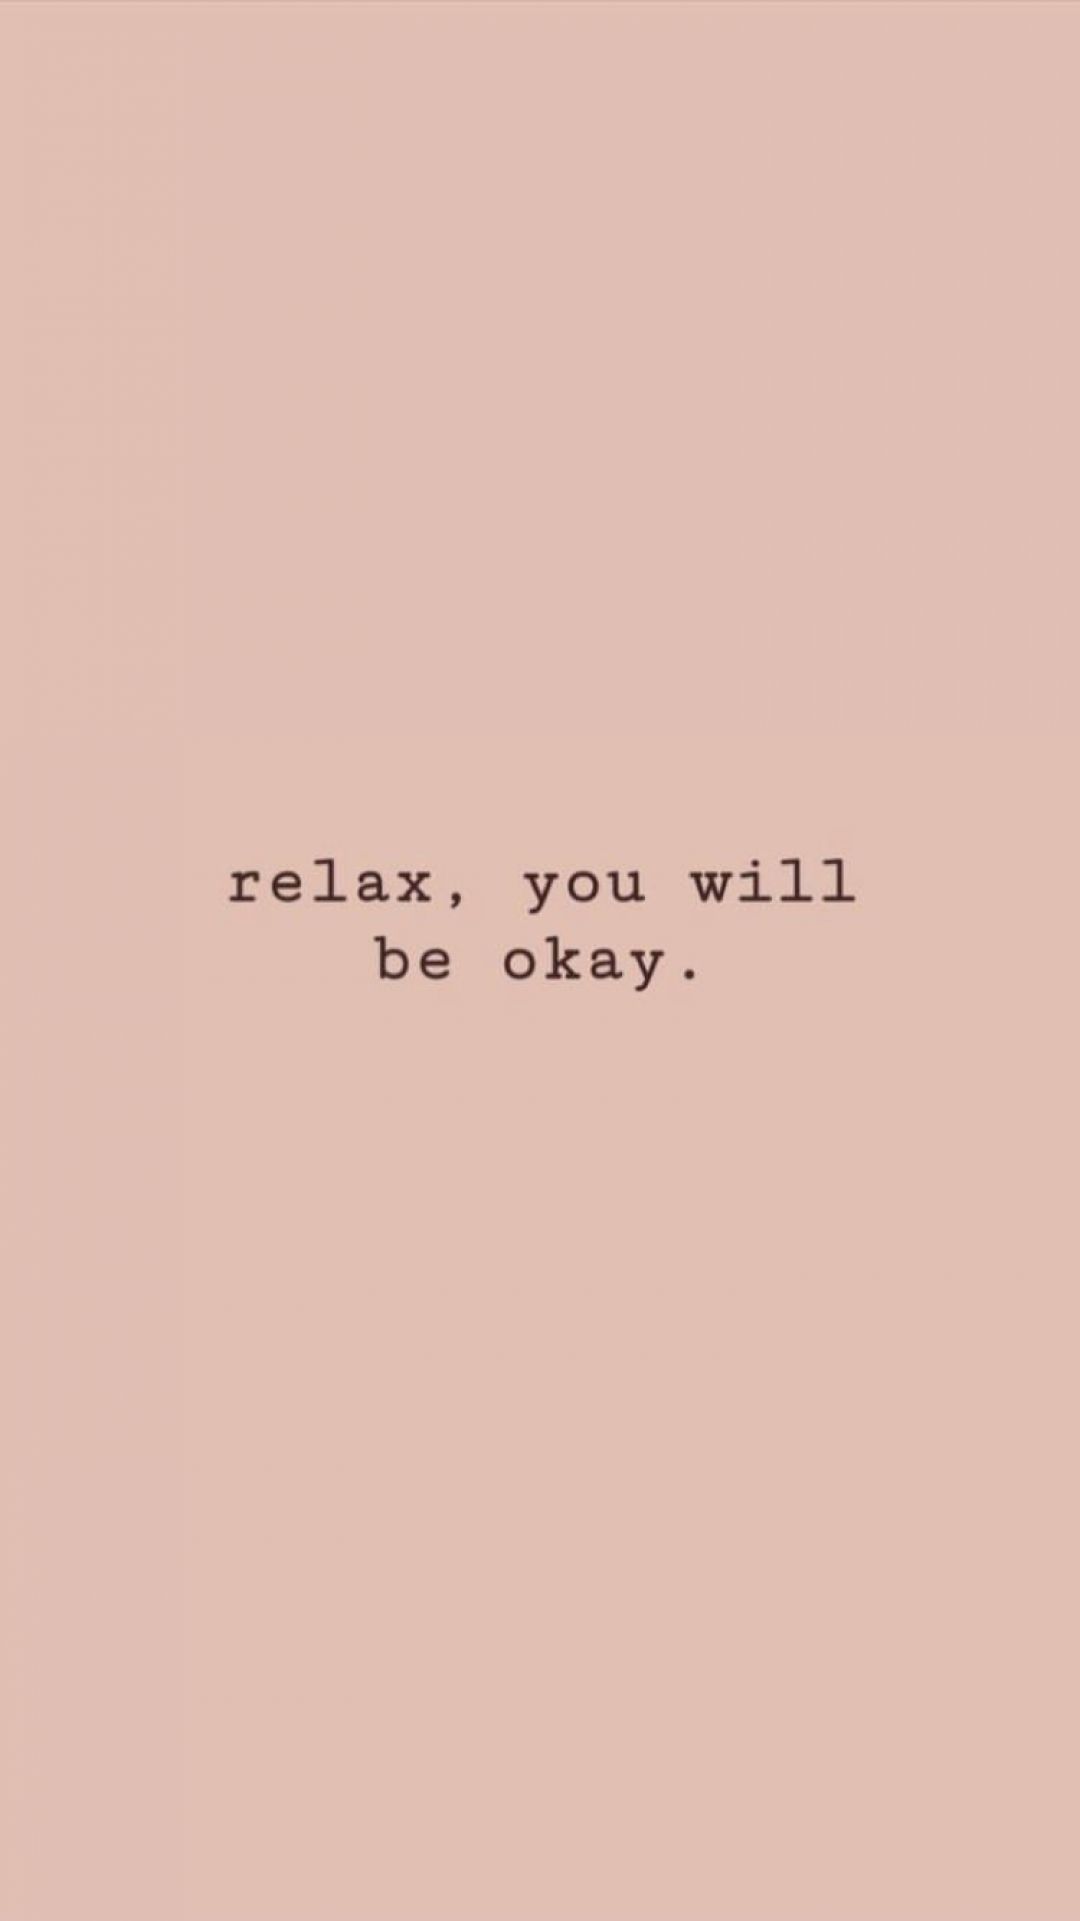 Relax you will be okay - Inspirational, motivational